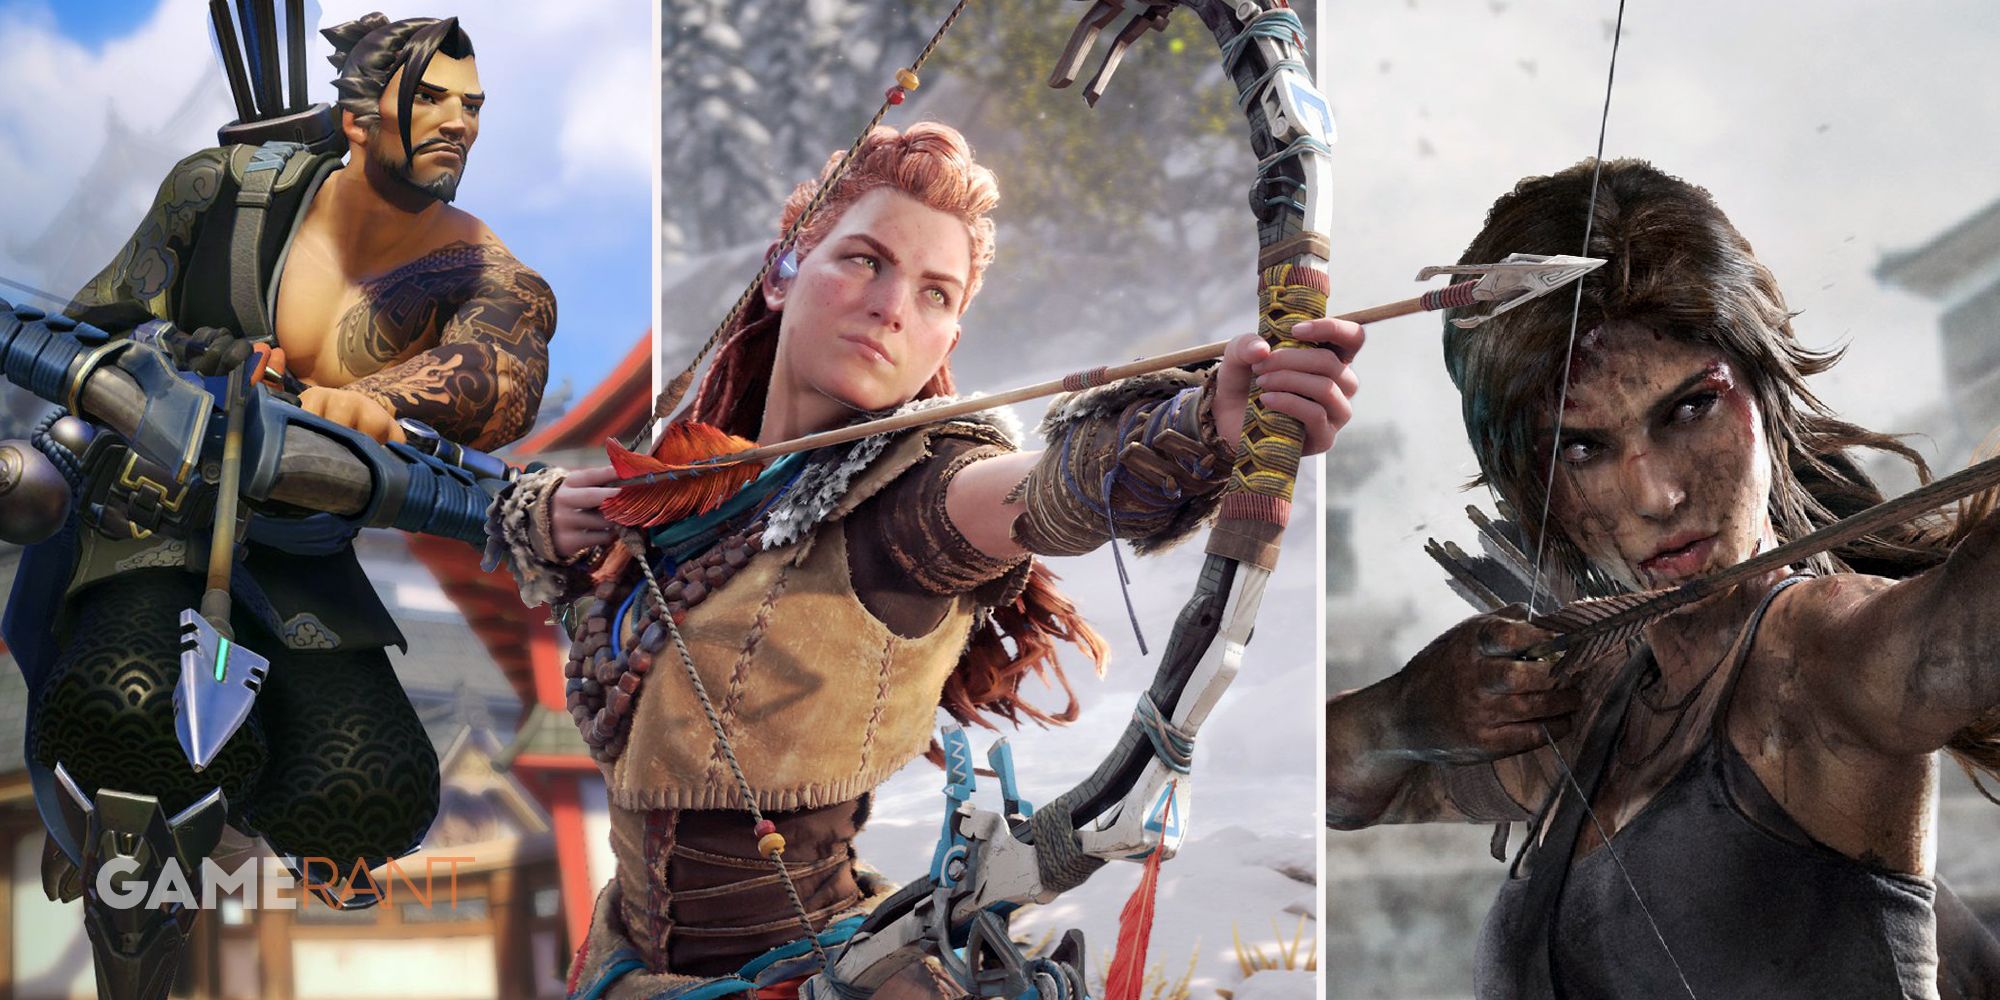 Hanzo from Overwatch jumping in the air with his bow and arrow in hand on left, Aloy from Horizon Forbidden West aiming her bow and arrow in middle, Lara Croft from Tomb Raider aiming her bow and arrow on right